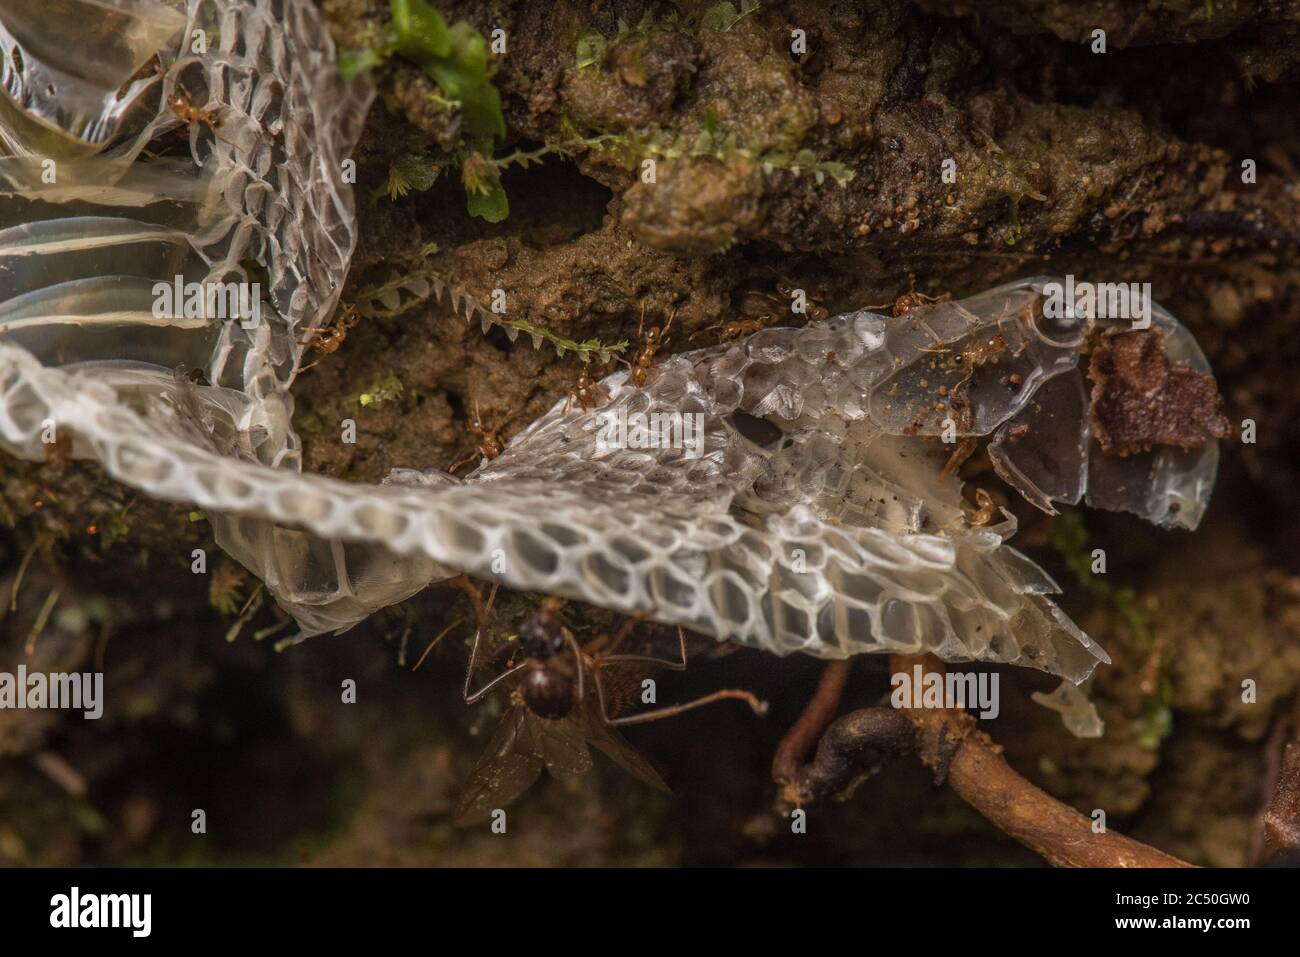 A shed snake skin on the forest floor in the Ecuadorian Amazon rainforest. Stock Photo